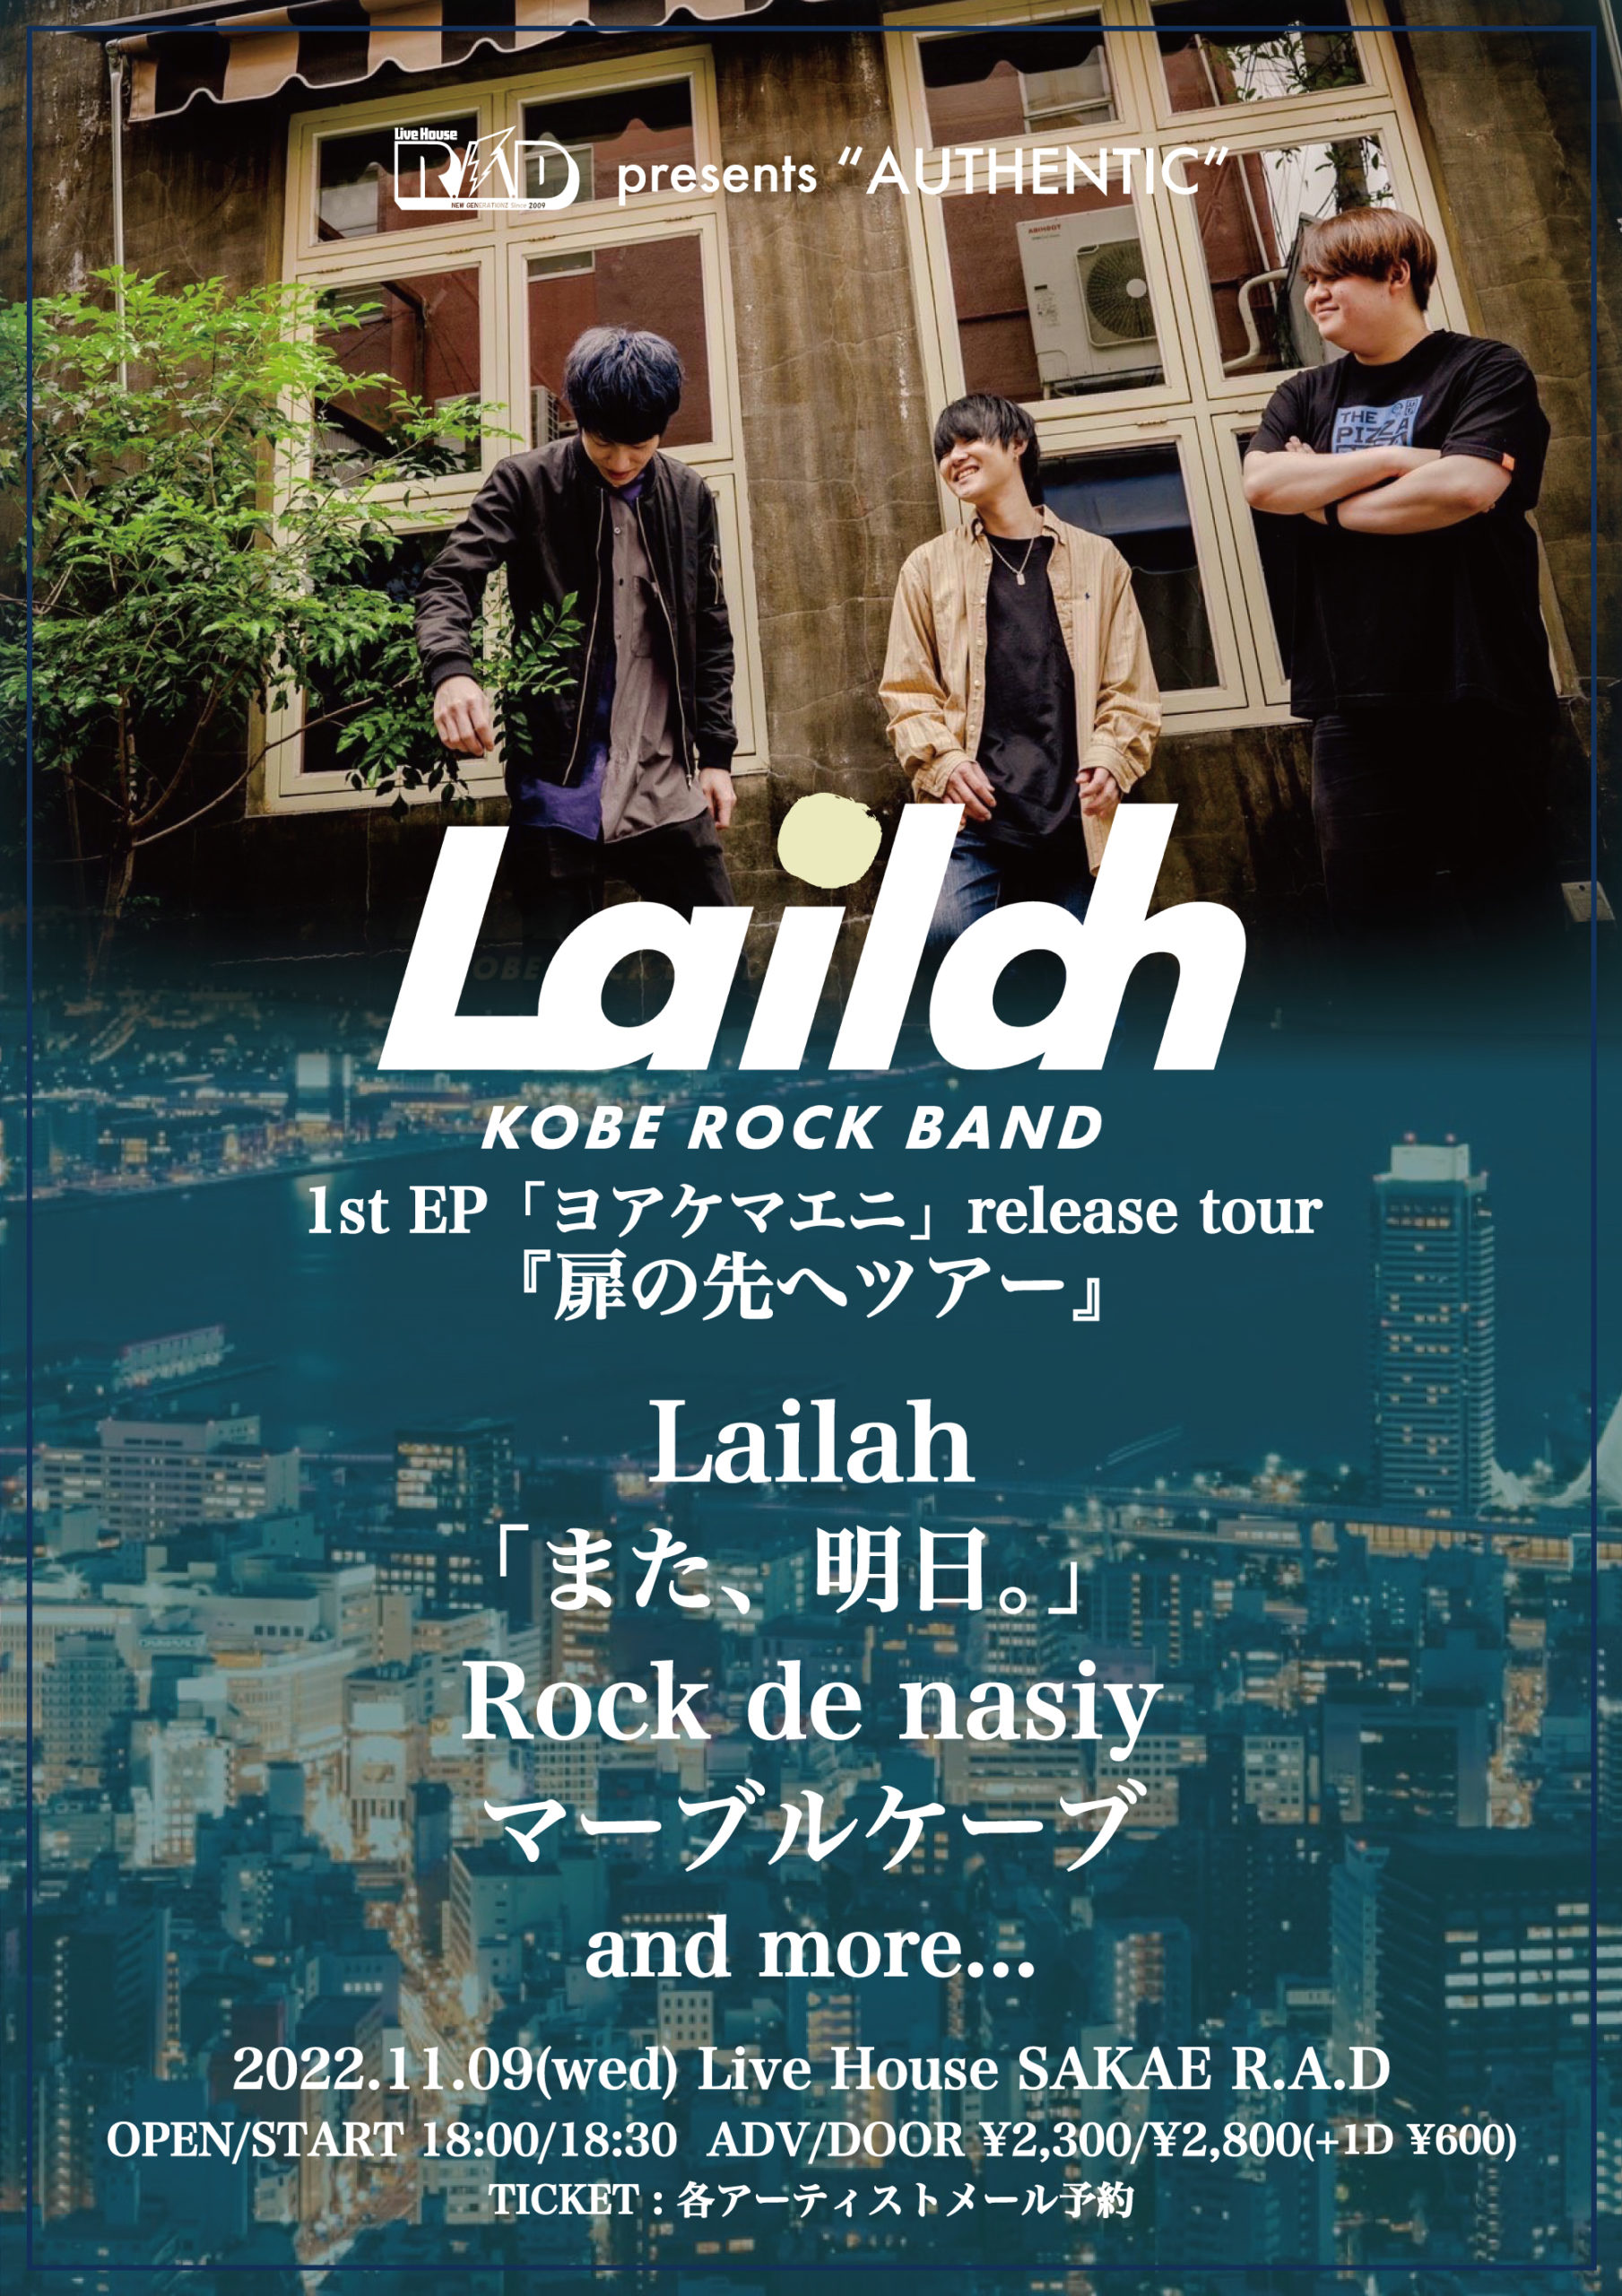 R.A.D presents "AUTHENTIC" Lailah 1st EP「ヨアケマエニ」 release tour「扉の先へツアー」